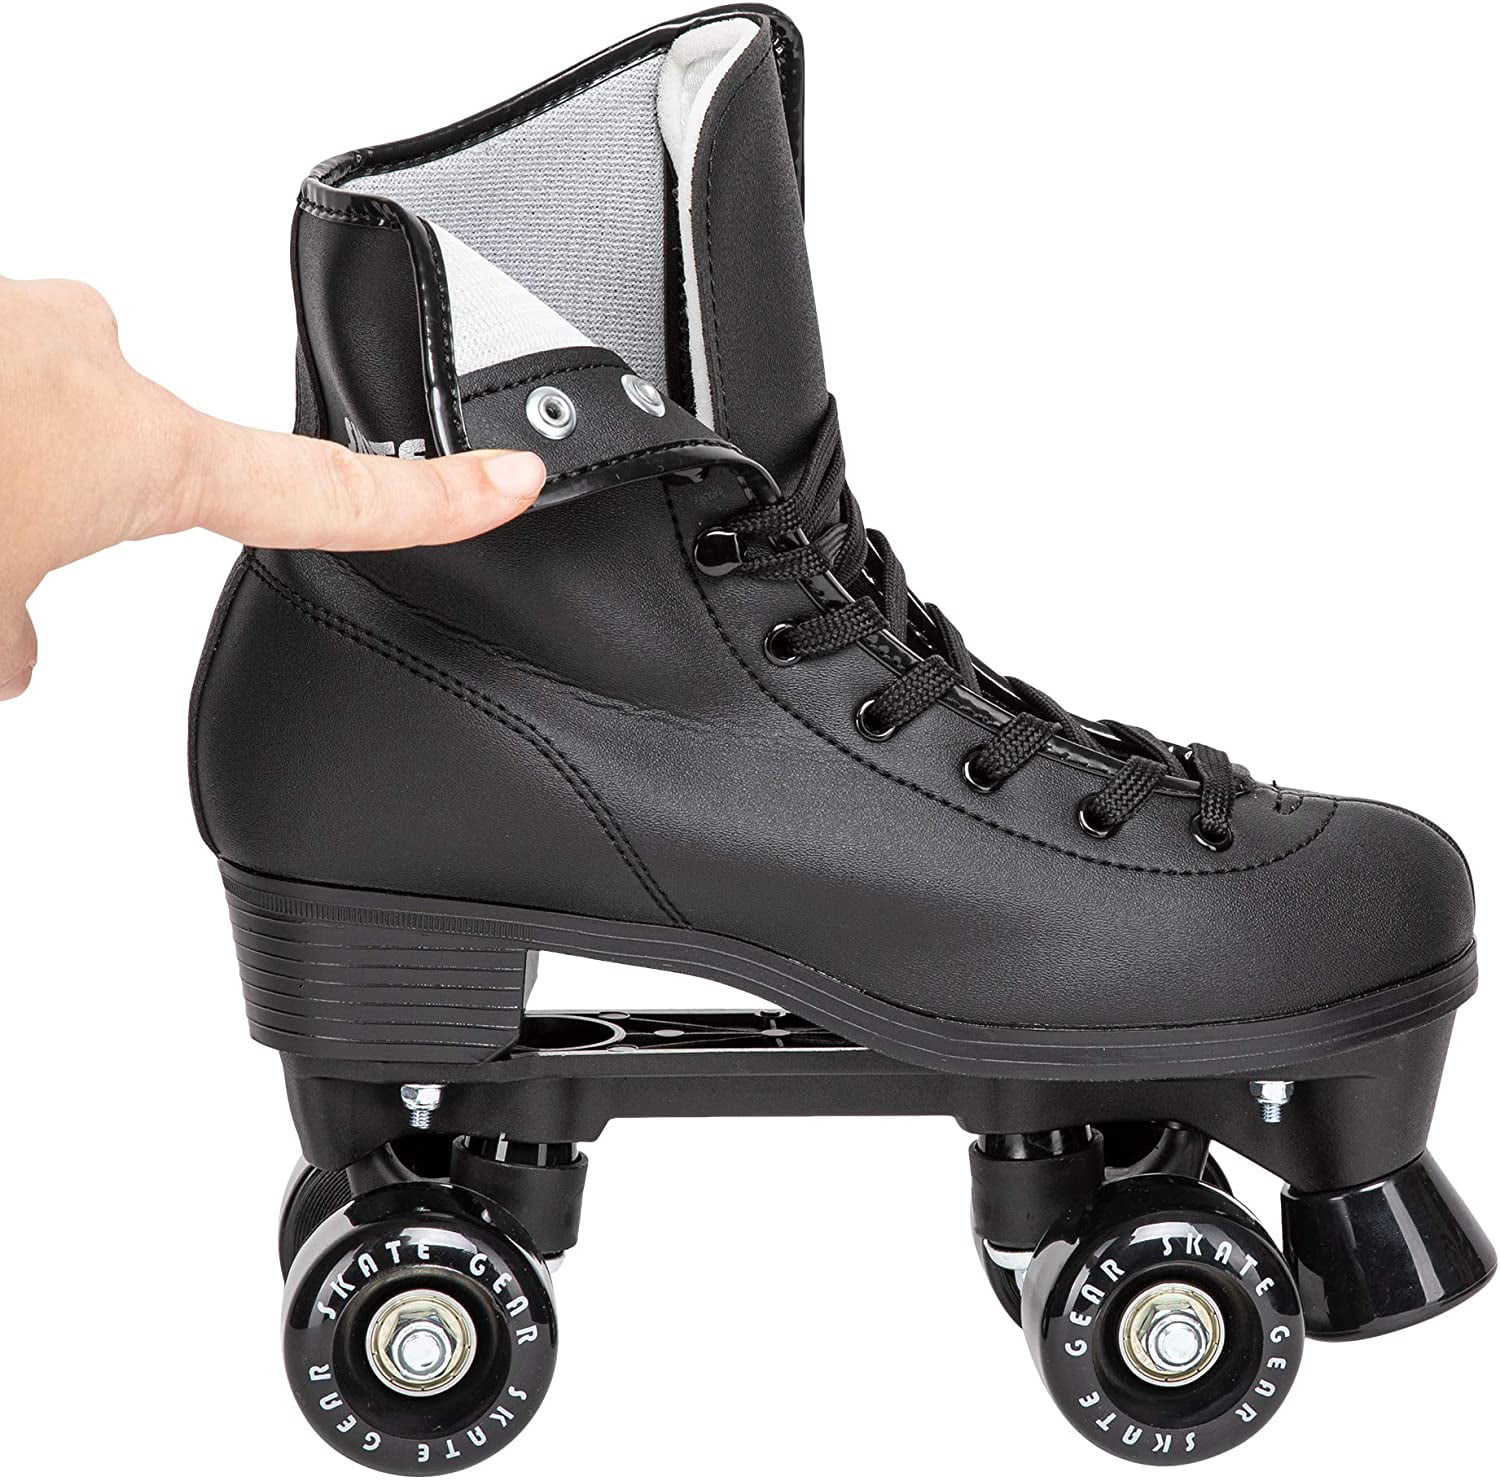 Skate Gear Roller Skates with Retro Quad Design for Kids and Adults Black 